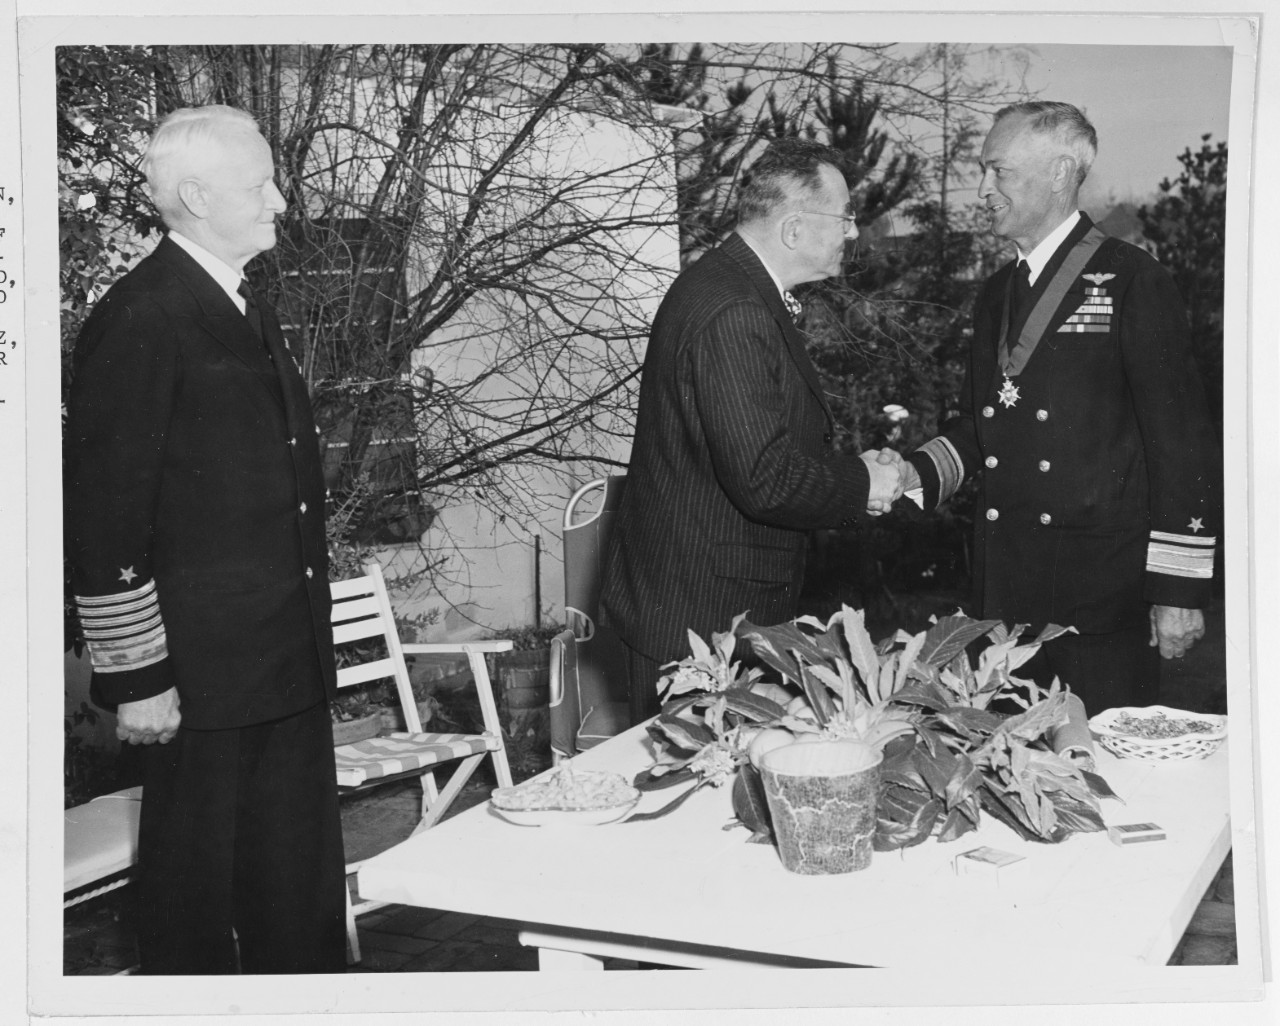 Rear Admiral Ernest L. Gunther, USN, was presented the insignia of companion of the order of the bath by Sir Carl Berendsen.